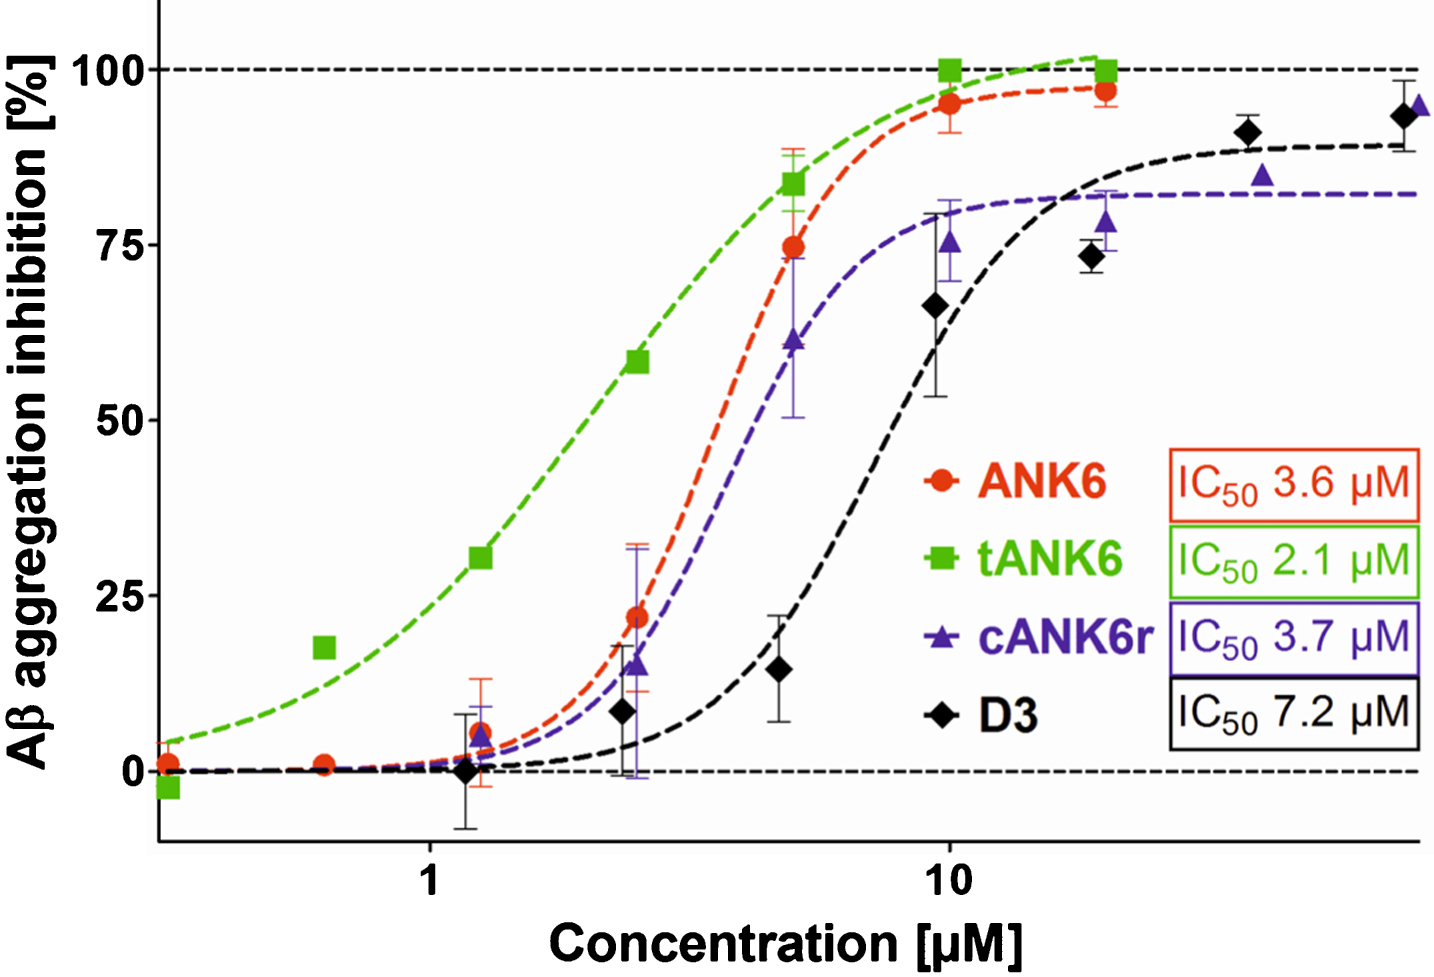 Aβ aggregation assay. To investigate ANK6’s (red circles), tANK6’s (green squares), cANK6r’s (blue triangles), and D3’s (black diamonds) potencies to inhibit Aβ1 - 42 monomer aggregation into ThT-positive fibrils, different concentrations of the respective peptides (0.3125-80μM) were incubated with 10μM Aβ1 - 42 each. The Aβ aggregation inhibition [%], relative to the fluorescence signal of ThT-positive Aβ1 - 42 fibrils which were formed without any peptide added, was plotted against the respective D-peptides’ concentrations. The IC50 values were determined by nonlinear regression.